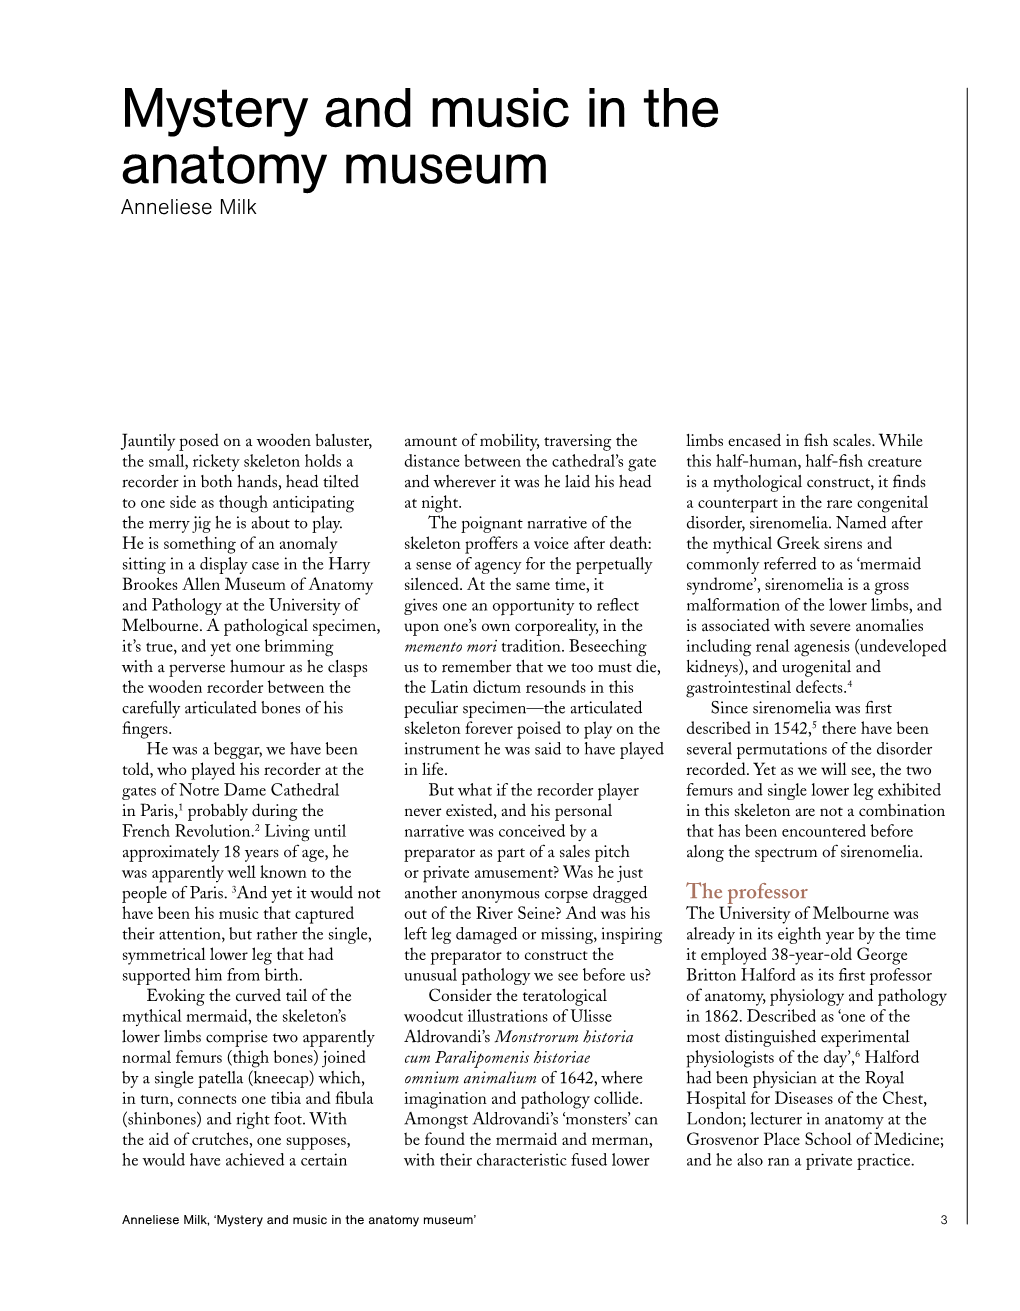 Anneliese Milk, 'Mystery and Music in the Anatomy Museum'